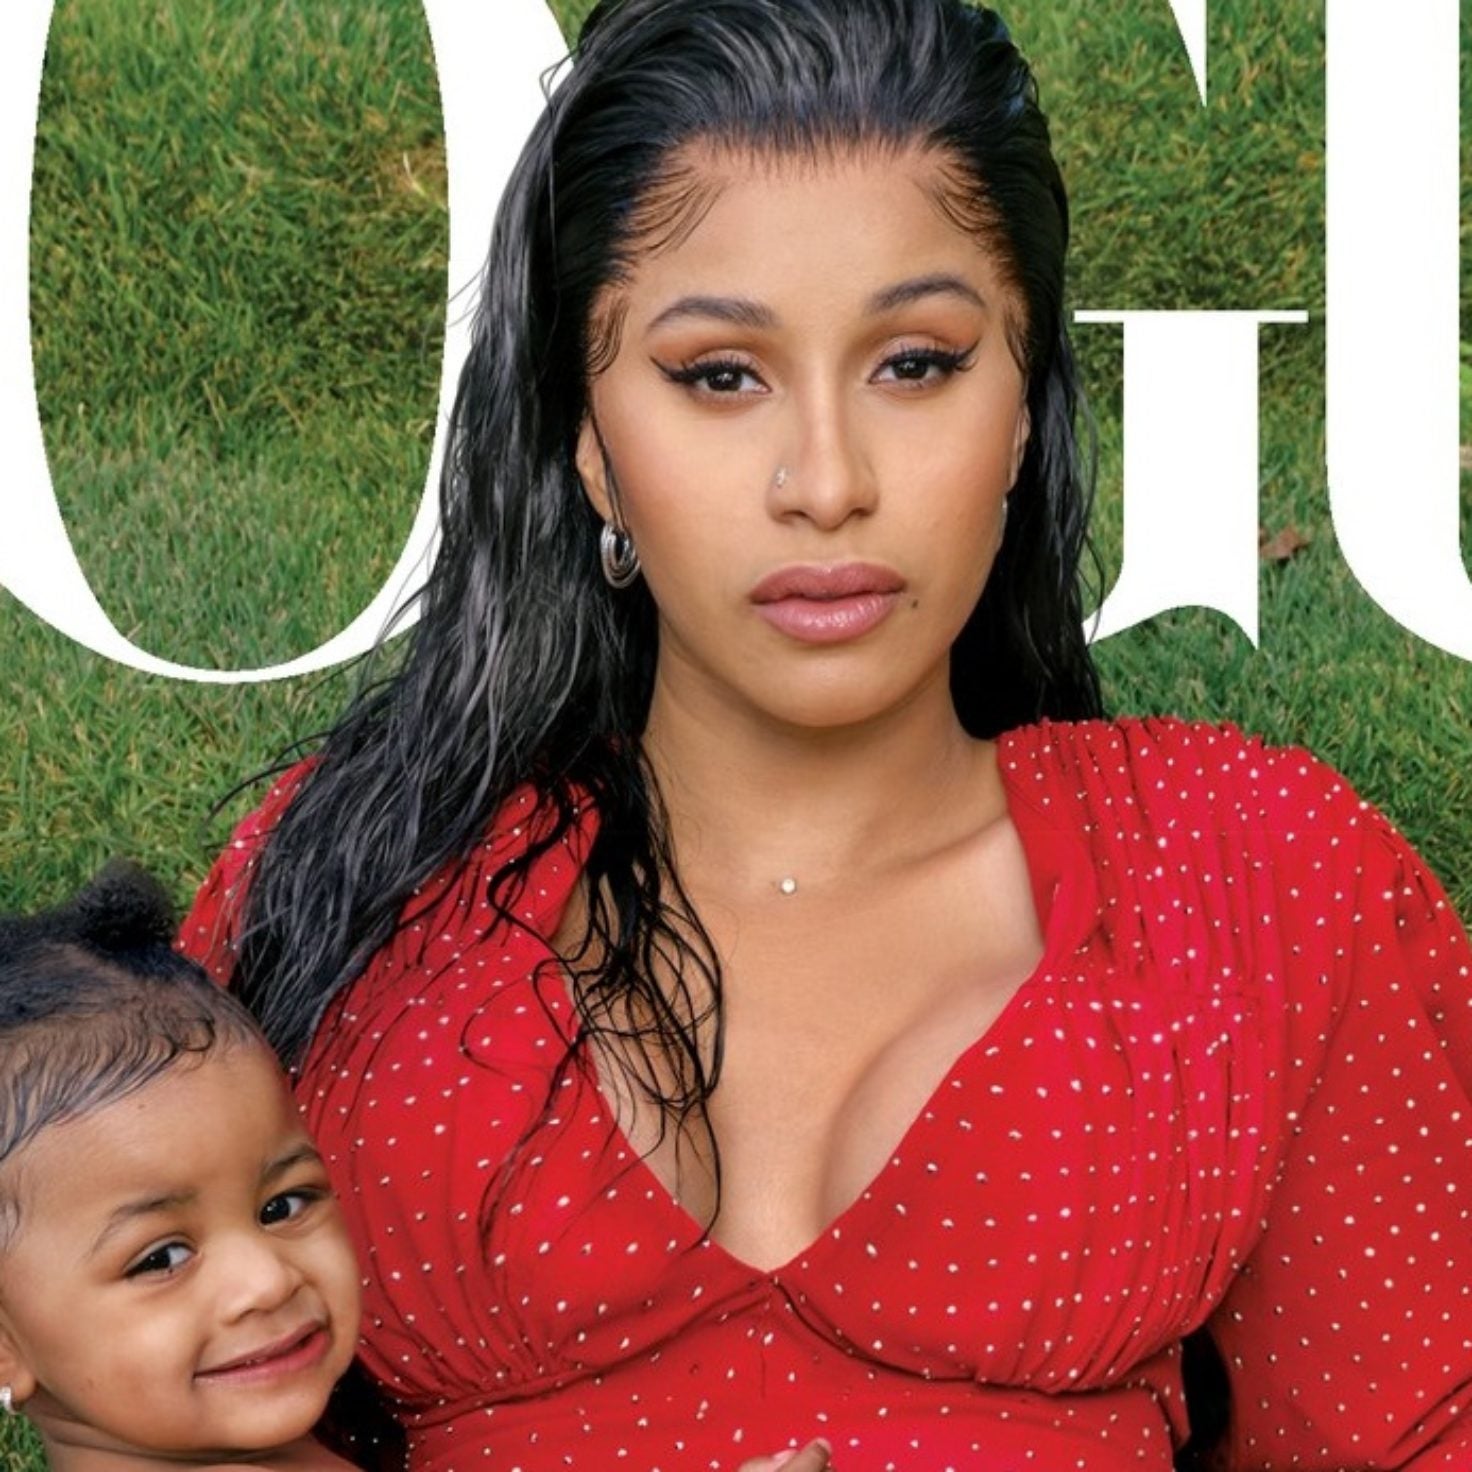 Cardi B Covers Vogue With Her Daughter Kulture